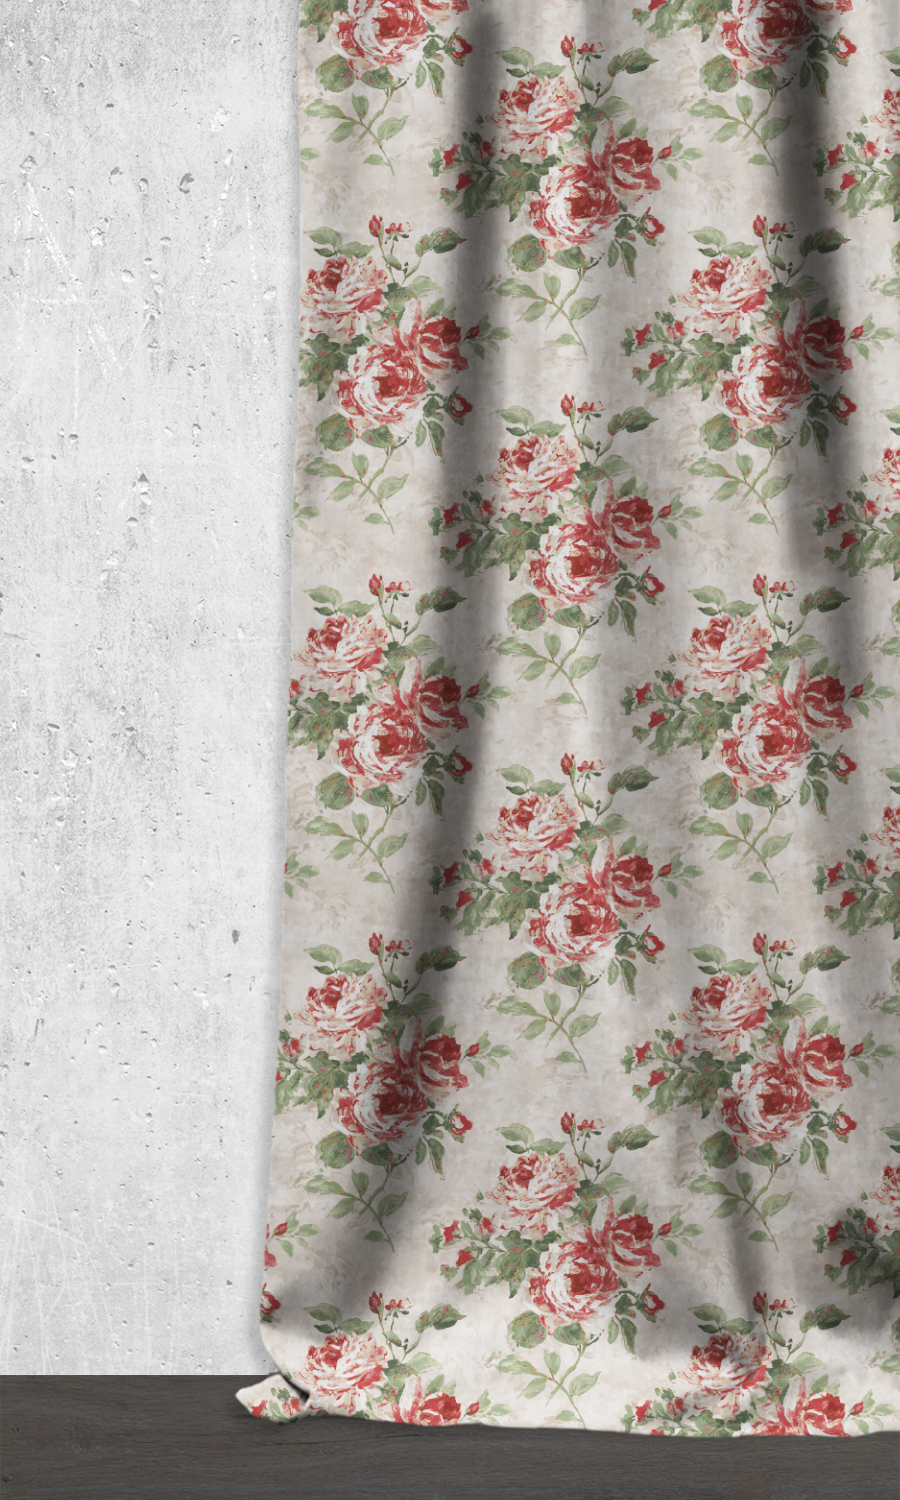 USA Populær Seraph 'Cedros' Dimout Floral Roman Shades/ Blinds (Red/ Pale Grey)